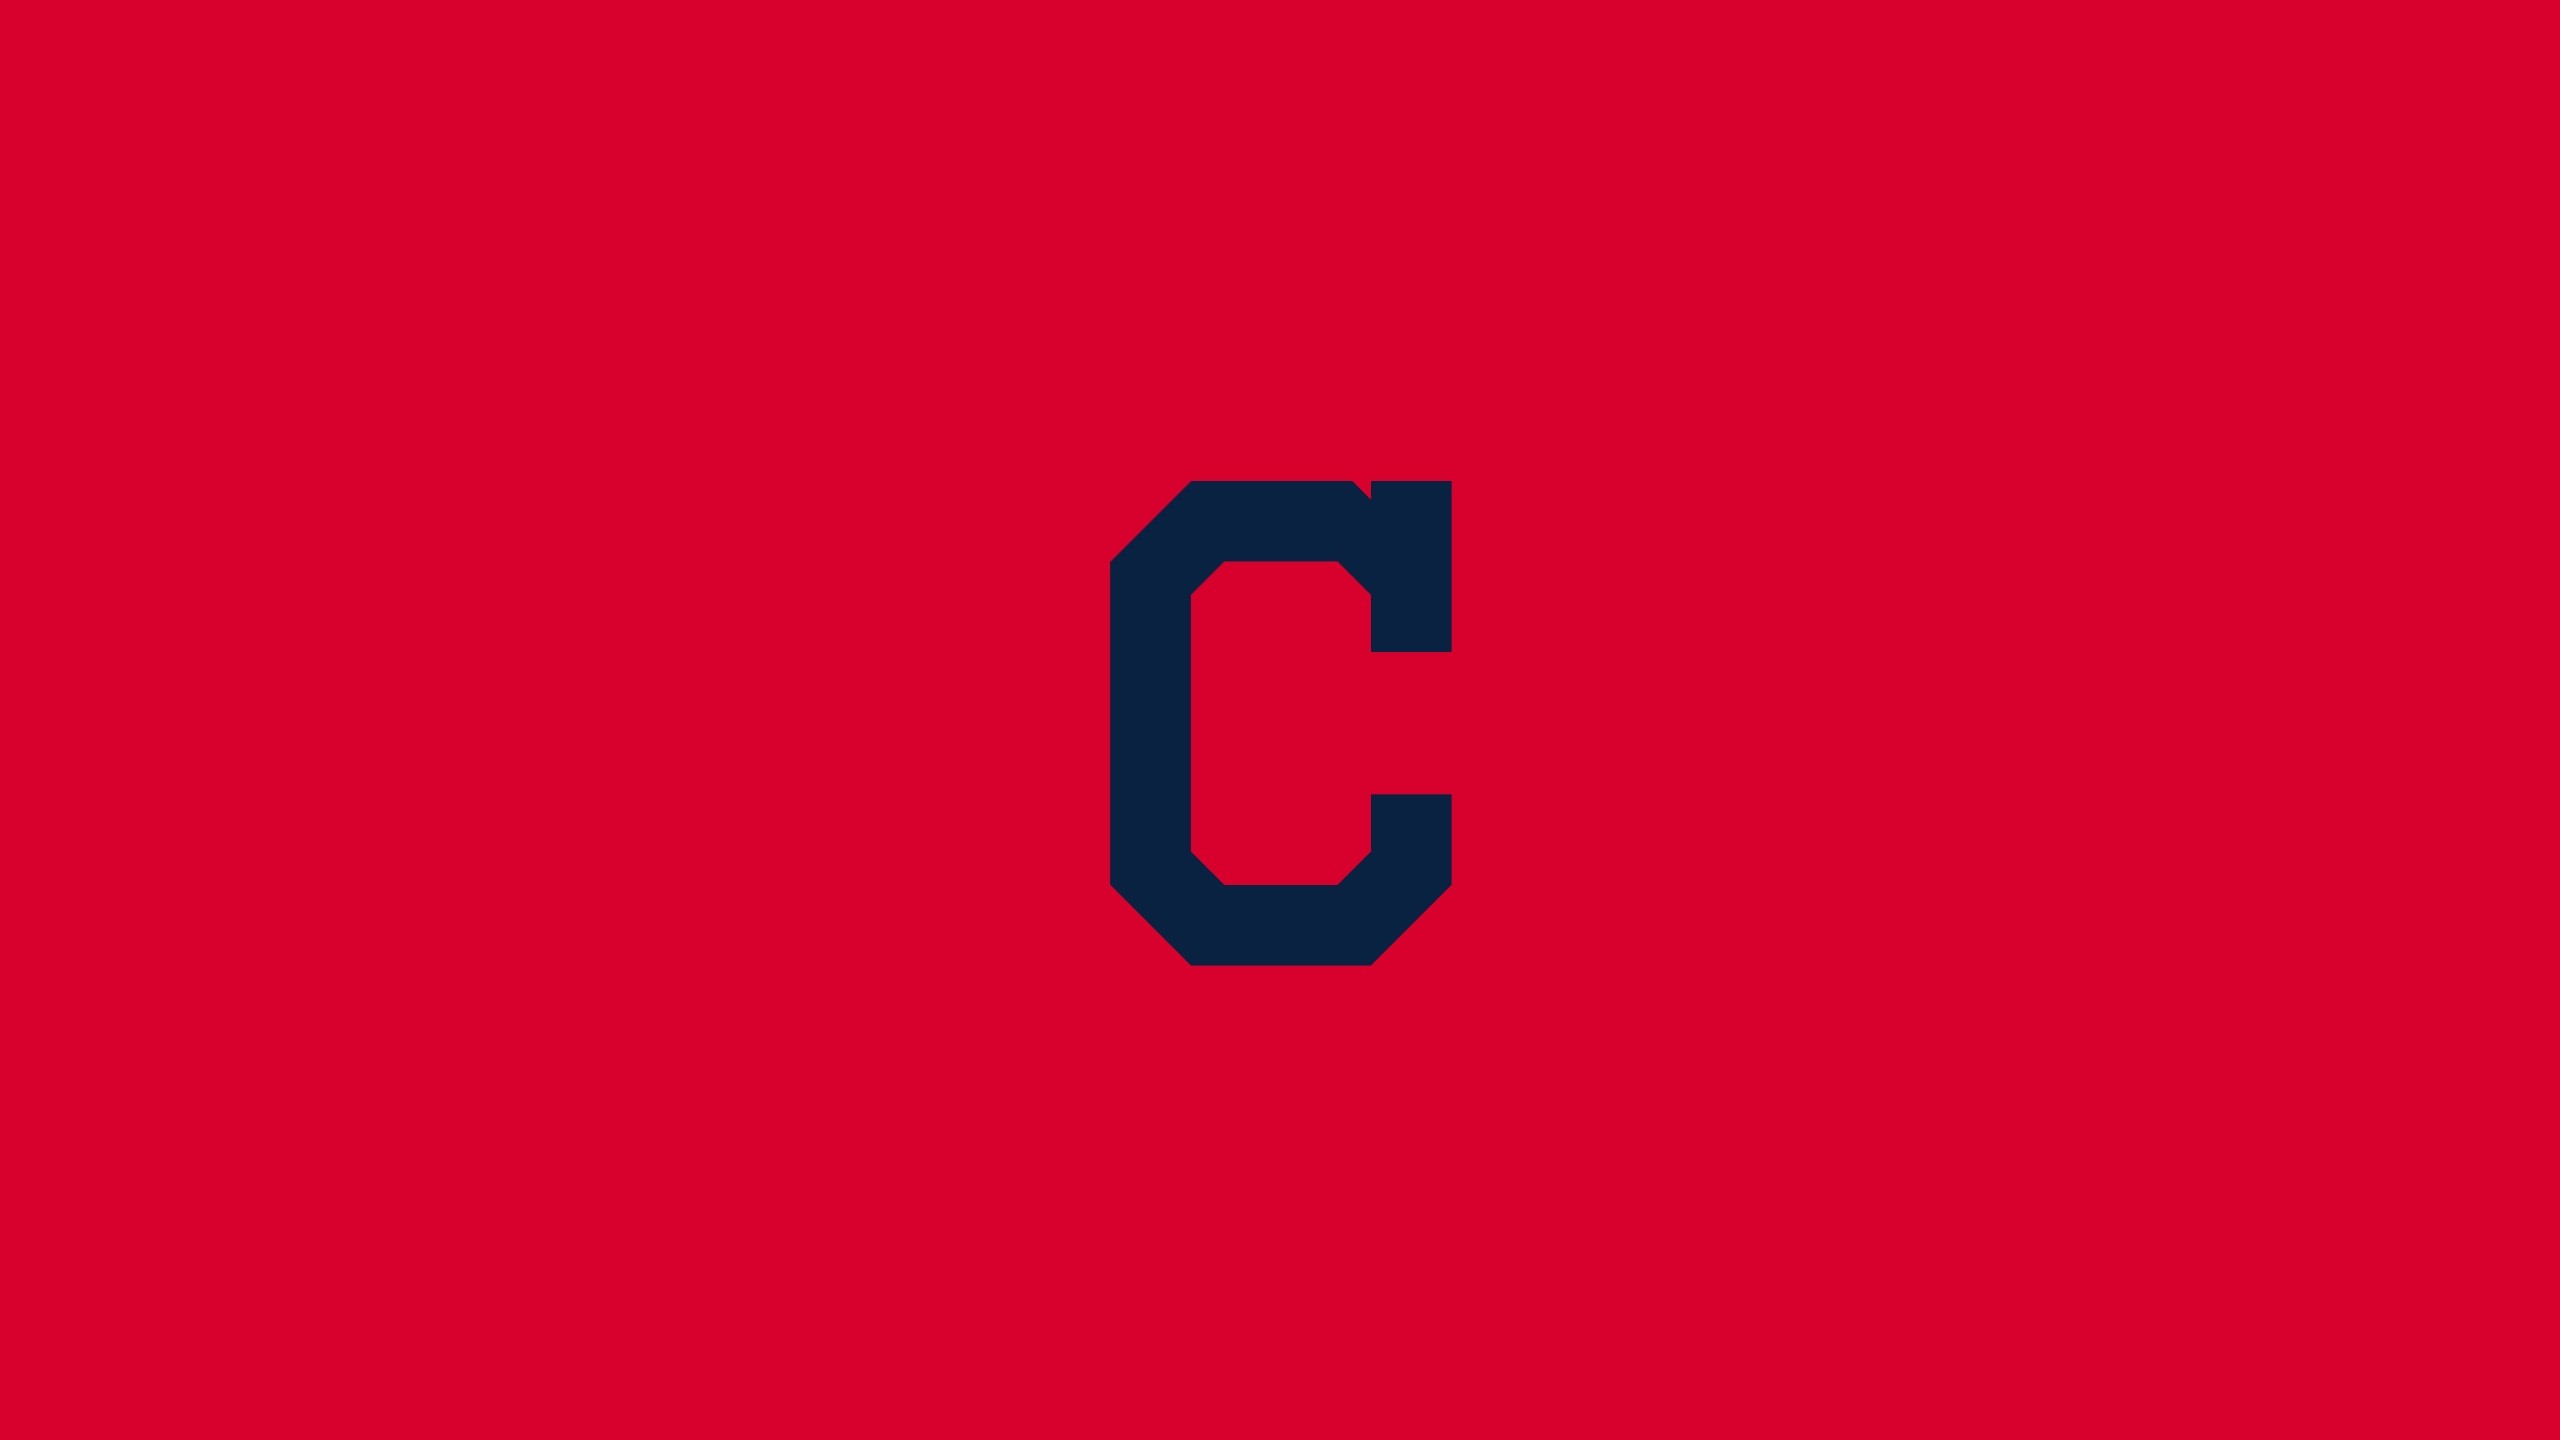 cleveland indians iphone wallpaper,text,font,logo,electric blue,brand  (#508939) - WallpaperUse